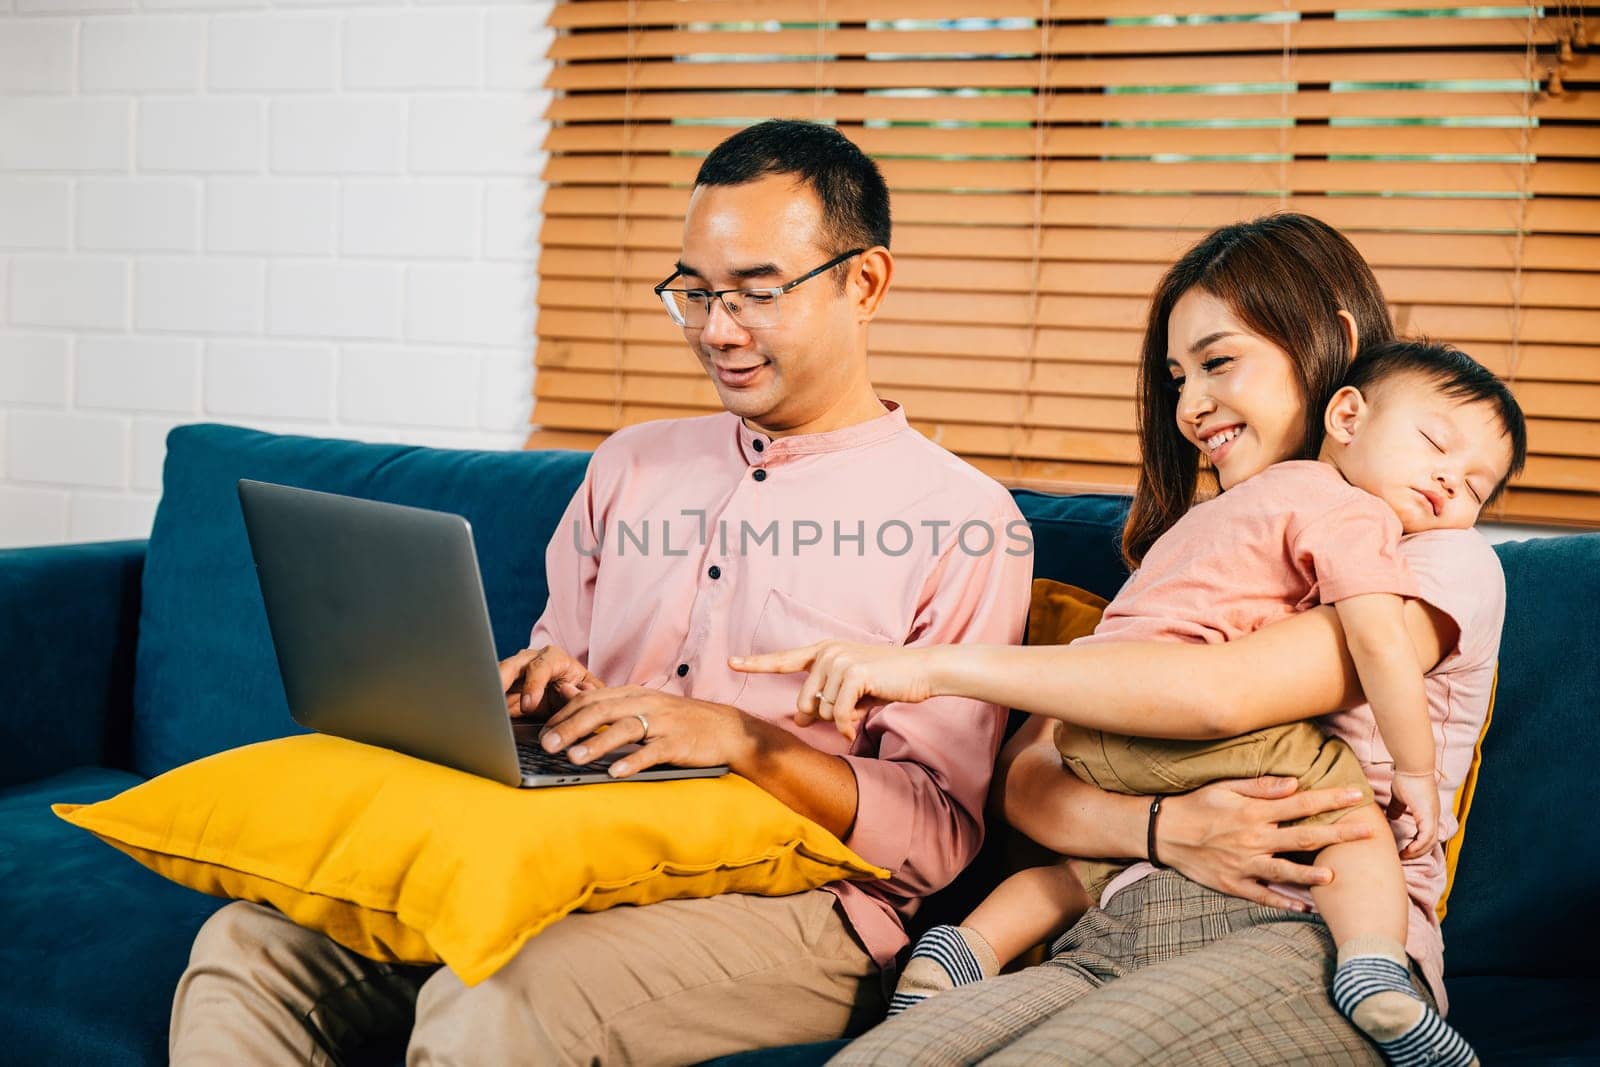 A mother carries her sleeping daughter while her husband works on a laptop depicting the juggling act of raising children and working. Family responsibility and love are evident in this portrait.